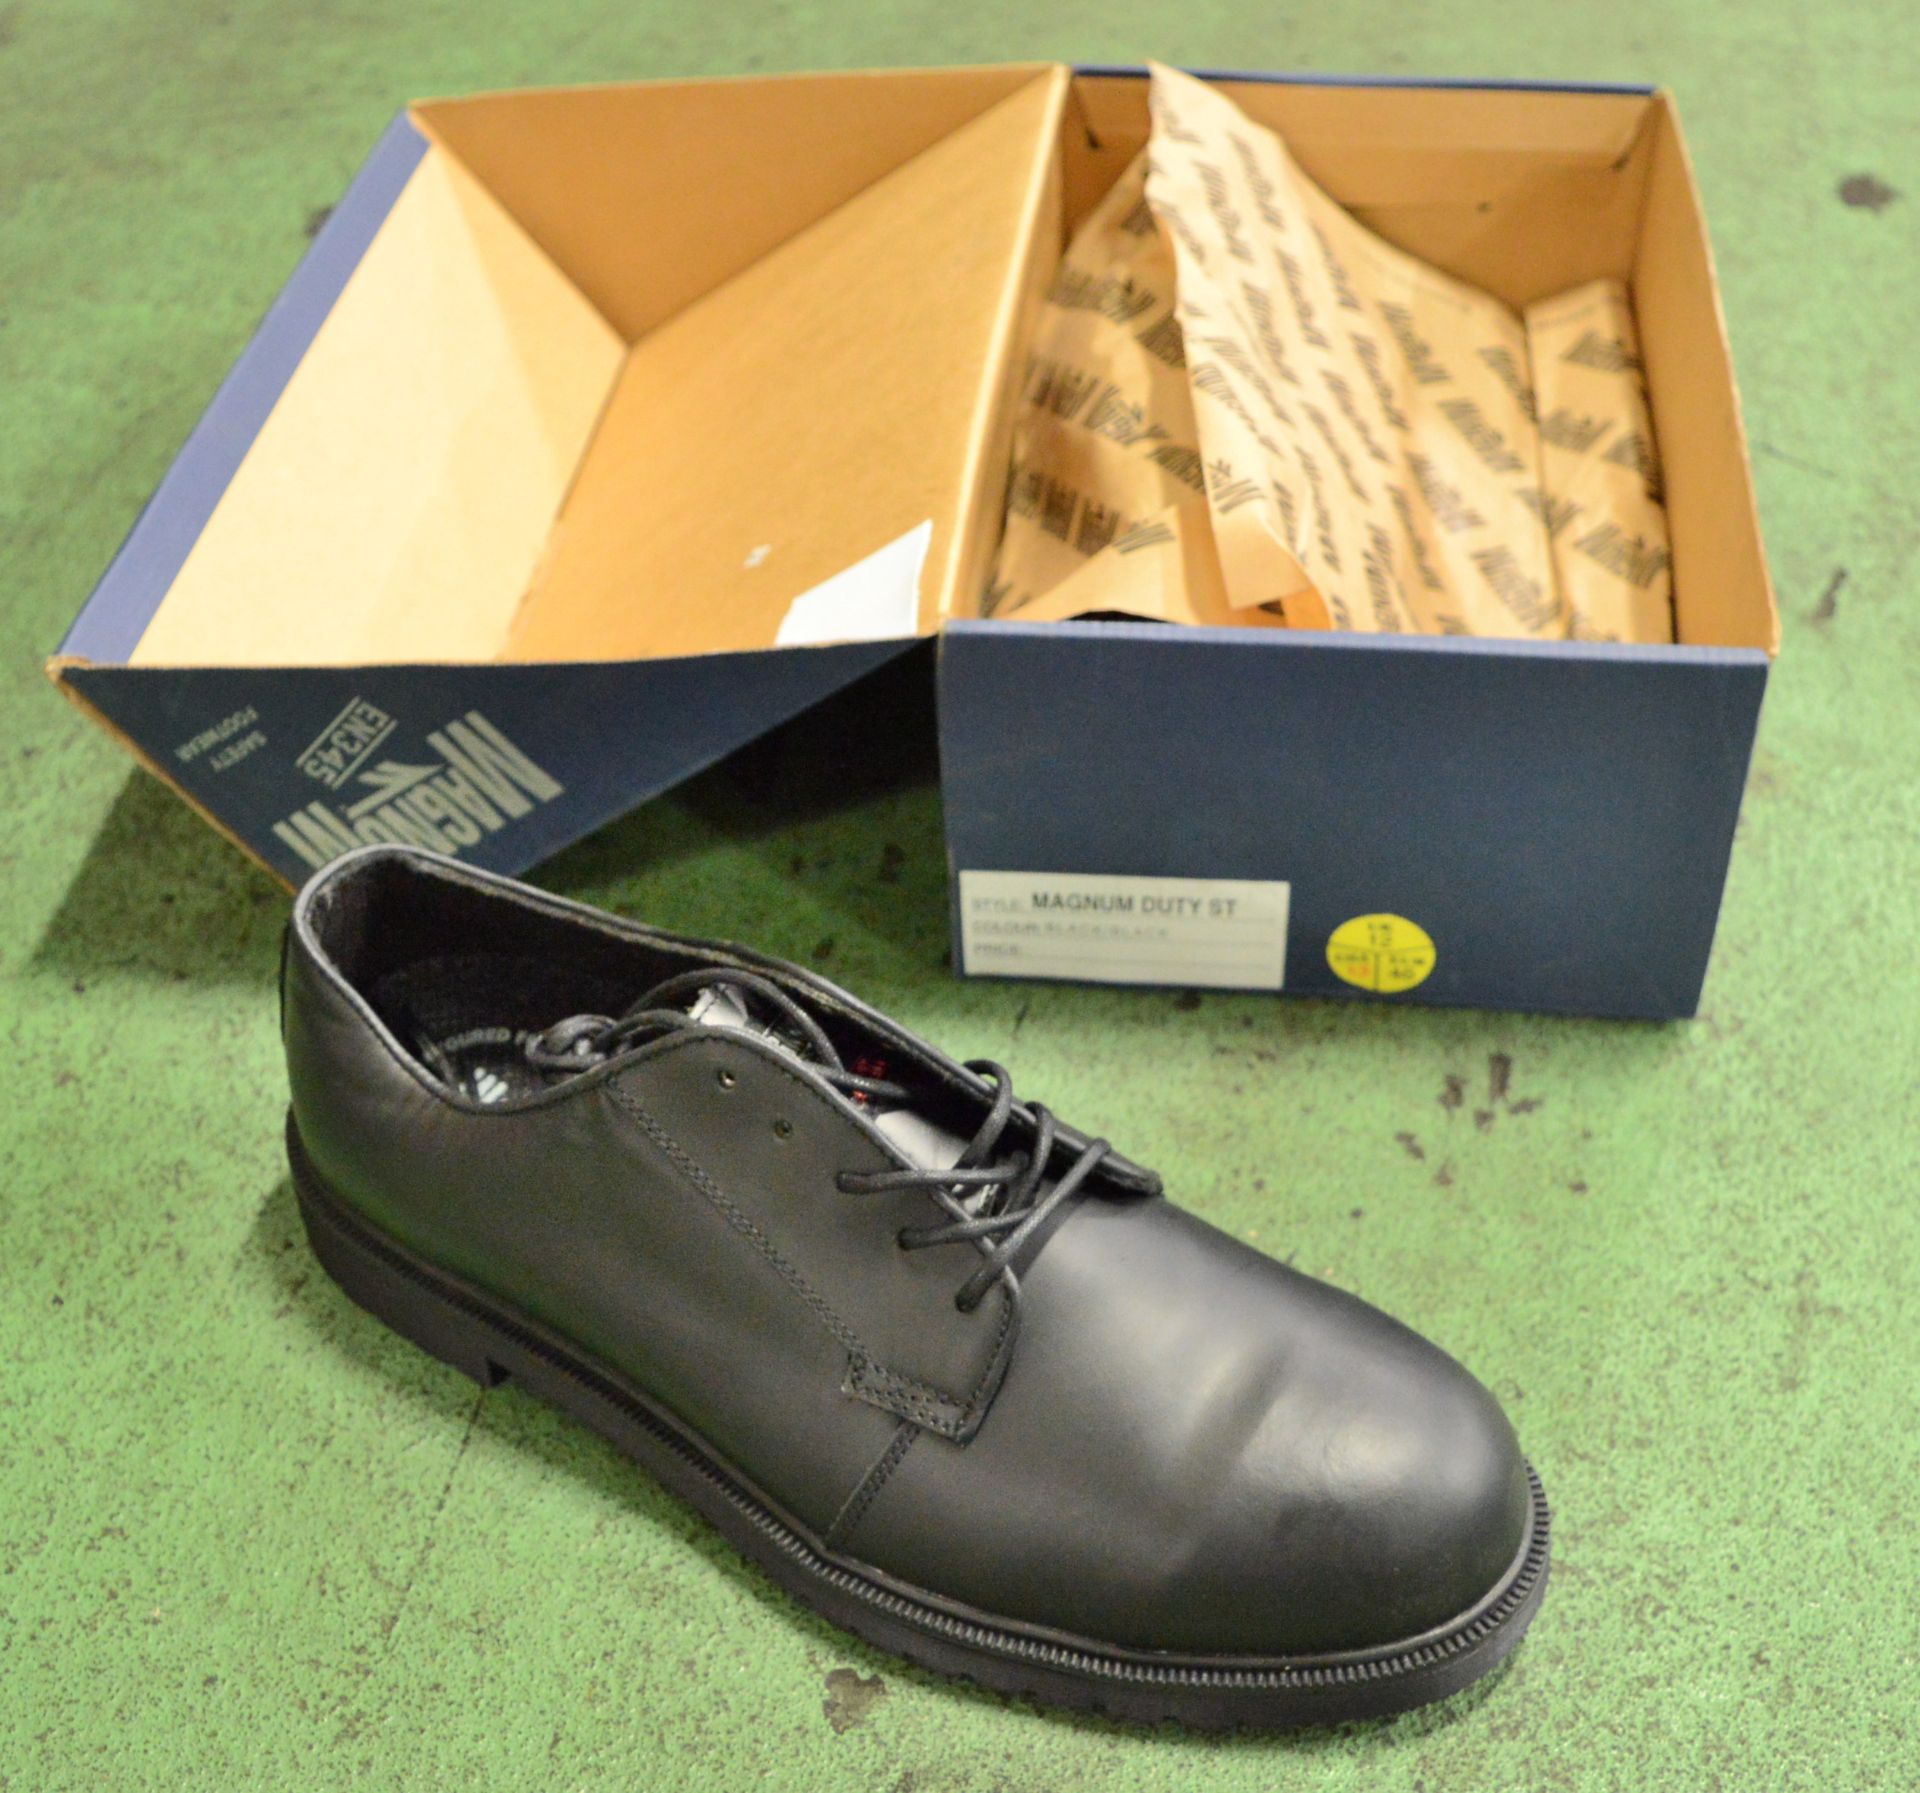 Magnum Standard Duty Work Shoes - Size 12.